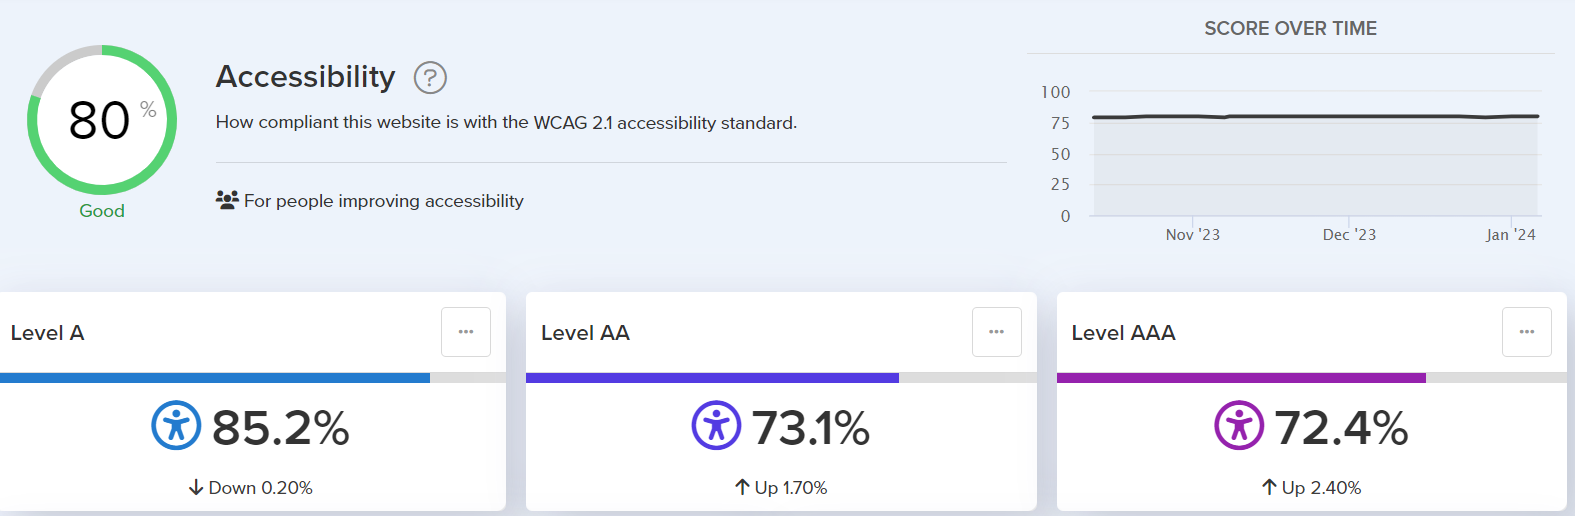 Accessibility testing results dashboard image